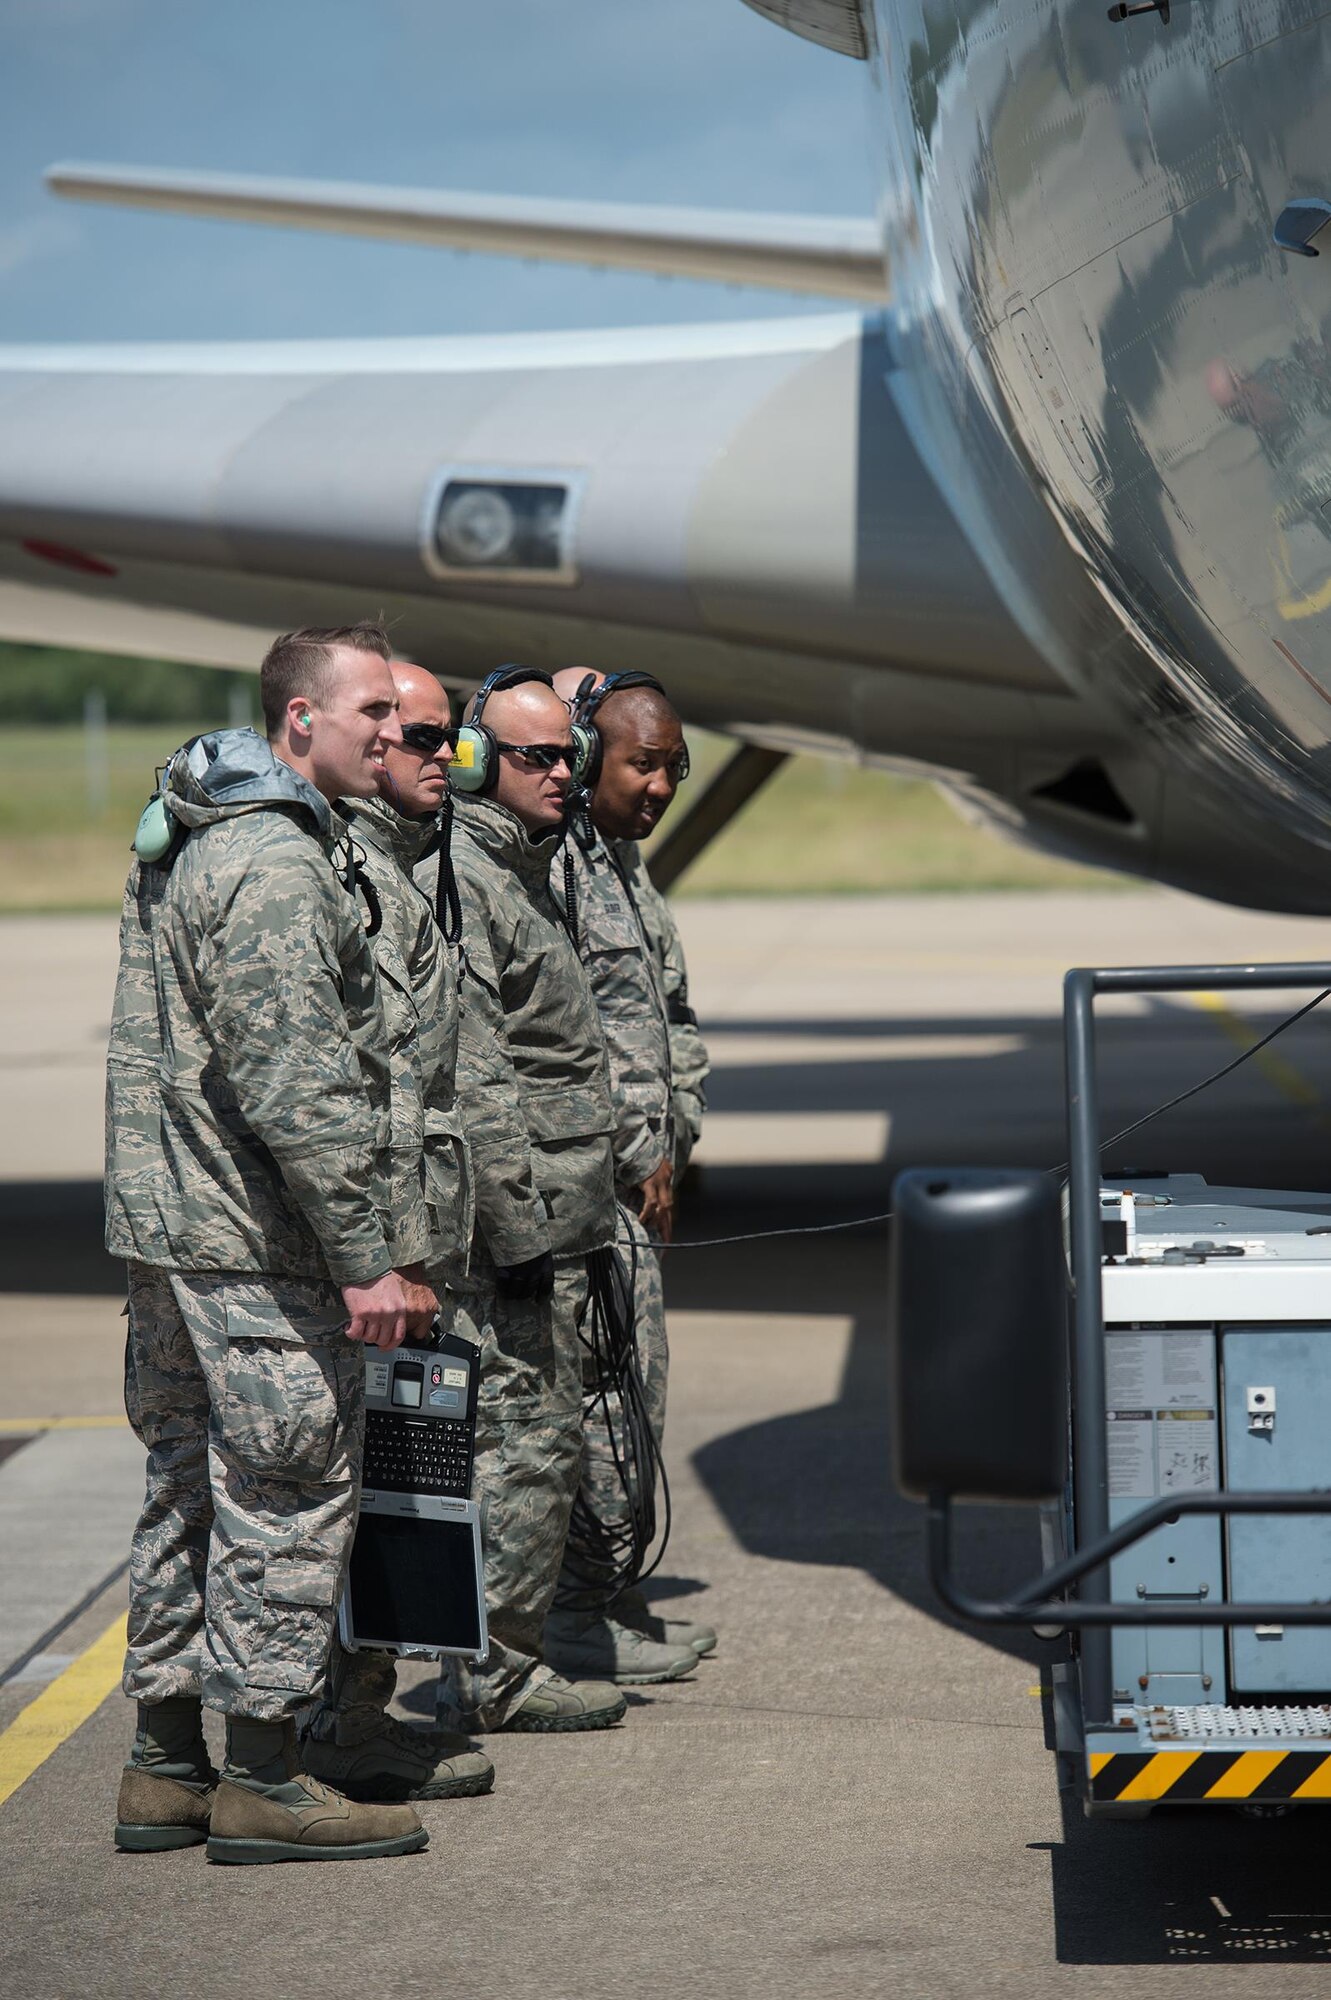 Maintenance Airmen from the 513th Air Control Group watch as an aircraft tow vehicle connects with a U.S. Air Force E-3 Sentry on June 7, 2017, at NATO Air Base Geilenkirchen, Germany. The 513th is providing airborne command and control to BALTOPS 2017, an exercise that involves 50 ships and submarines and 40 aircraft from 14 member nations. (U.S. Air Force photo/2nd Lt. Caleb Wanzer)